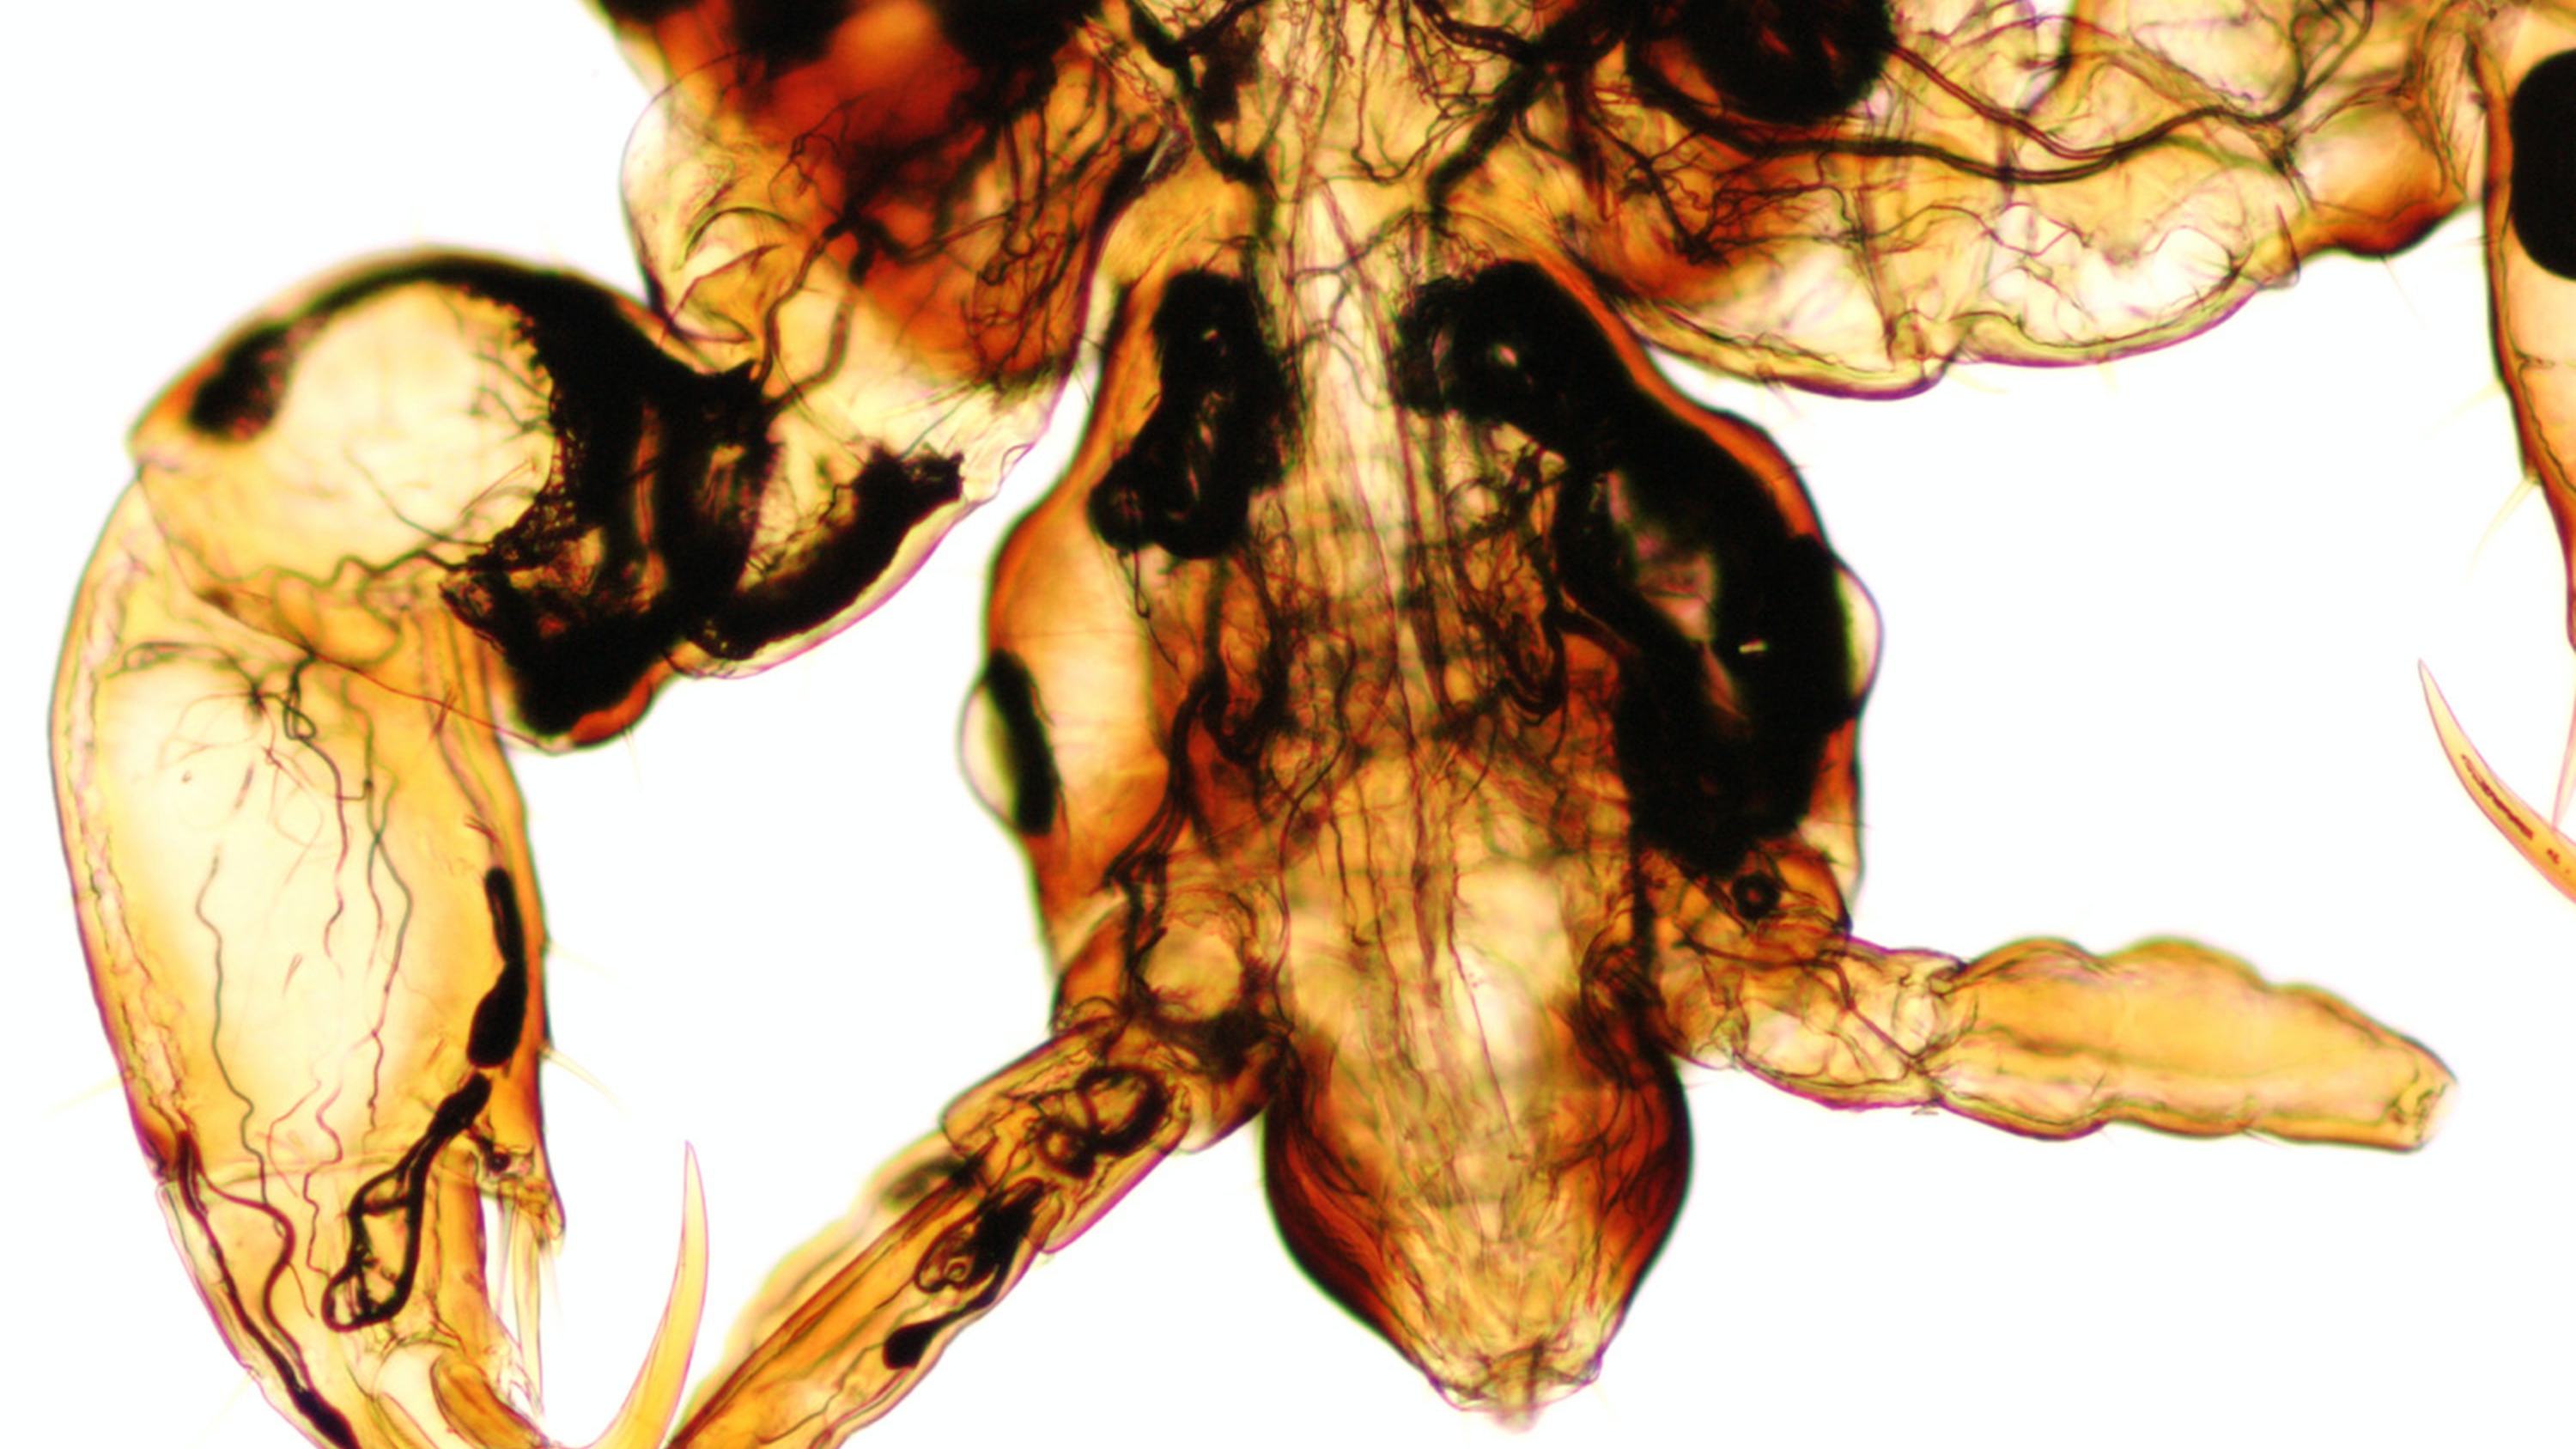 microscopic view of a head louse